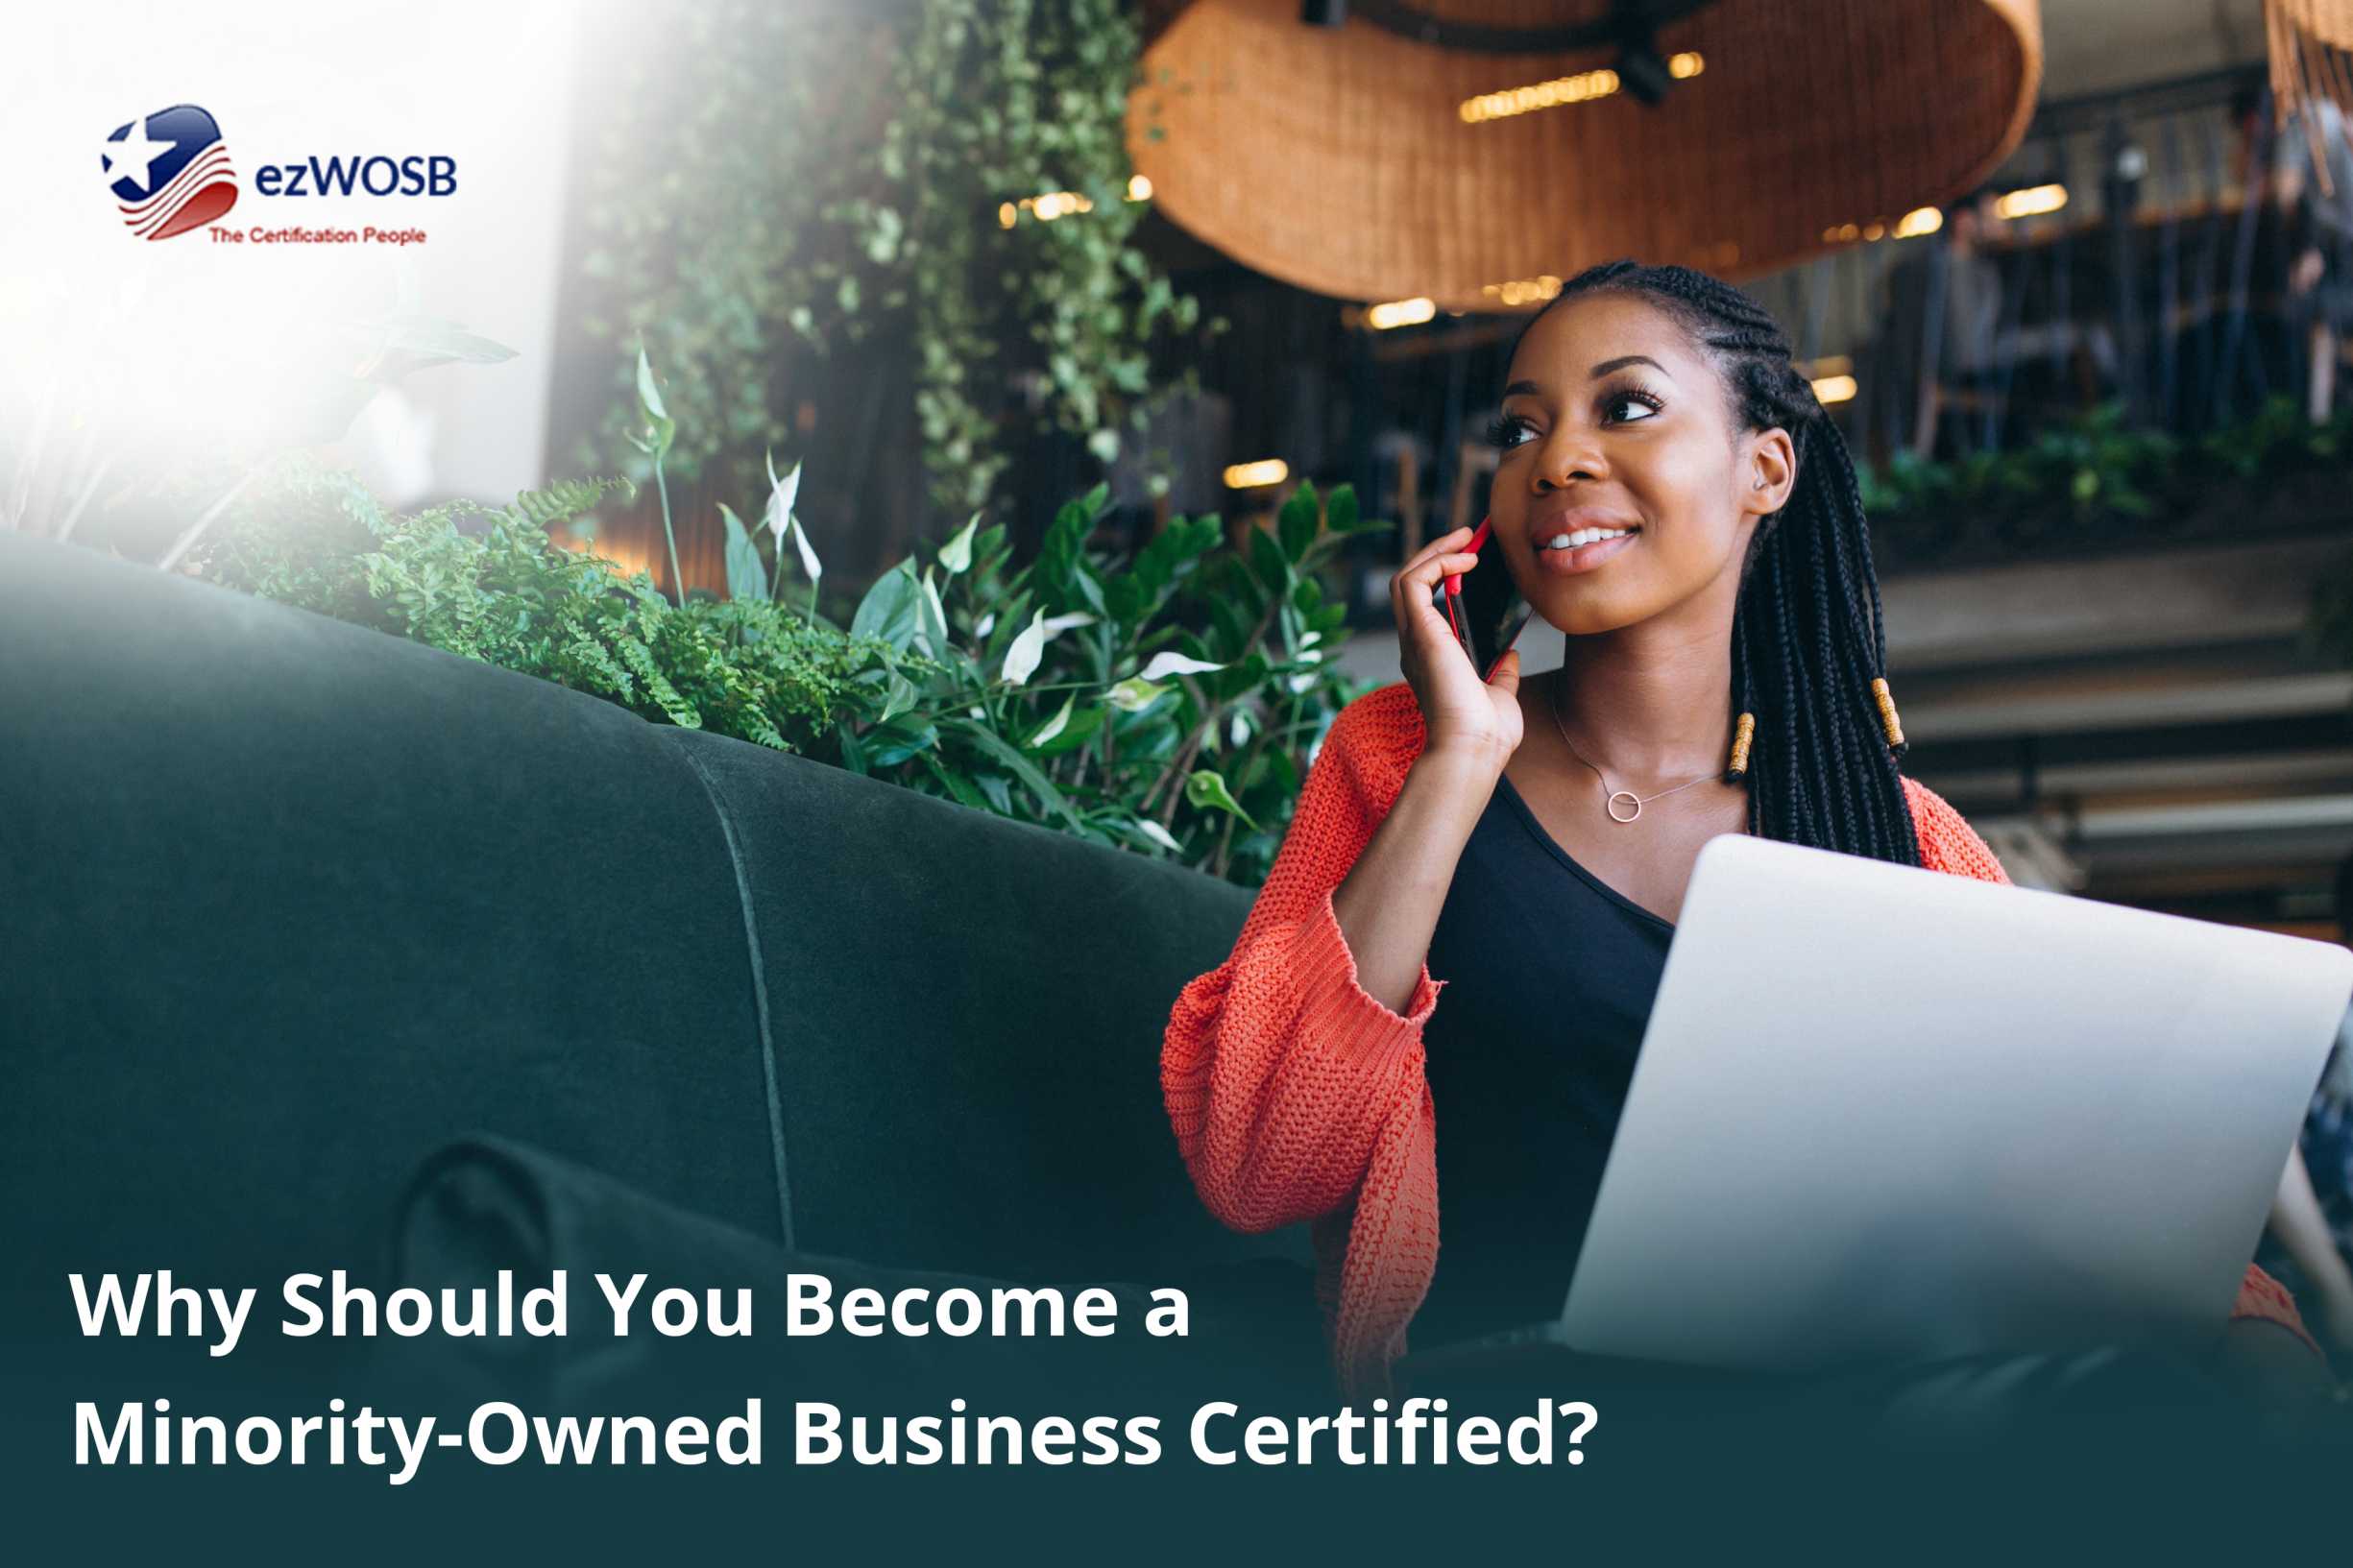 MBE Certification: How To Get Minority-Owned Certified?